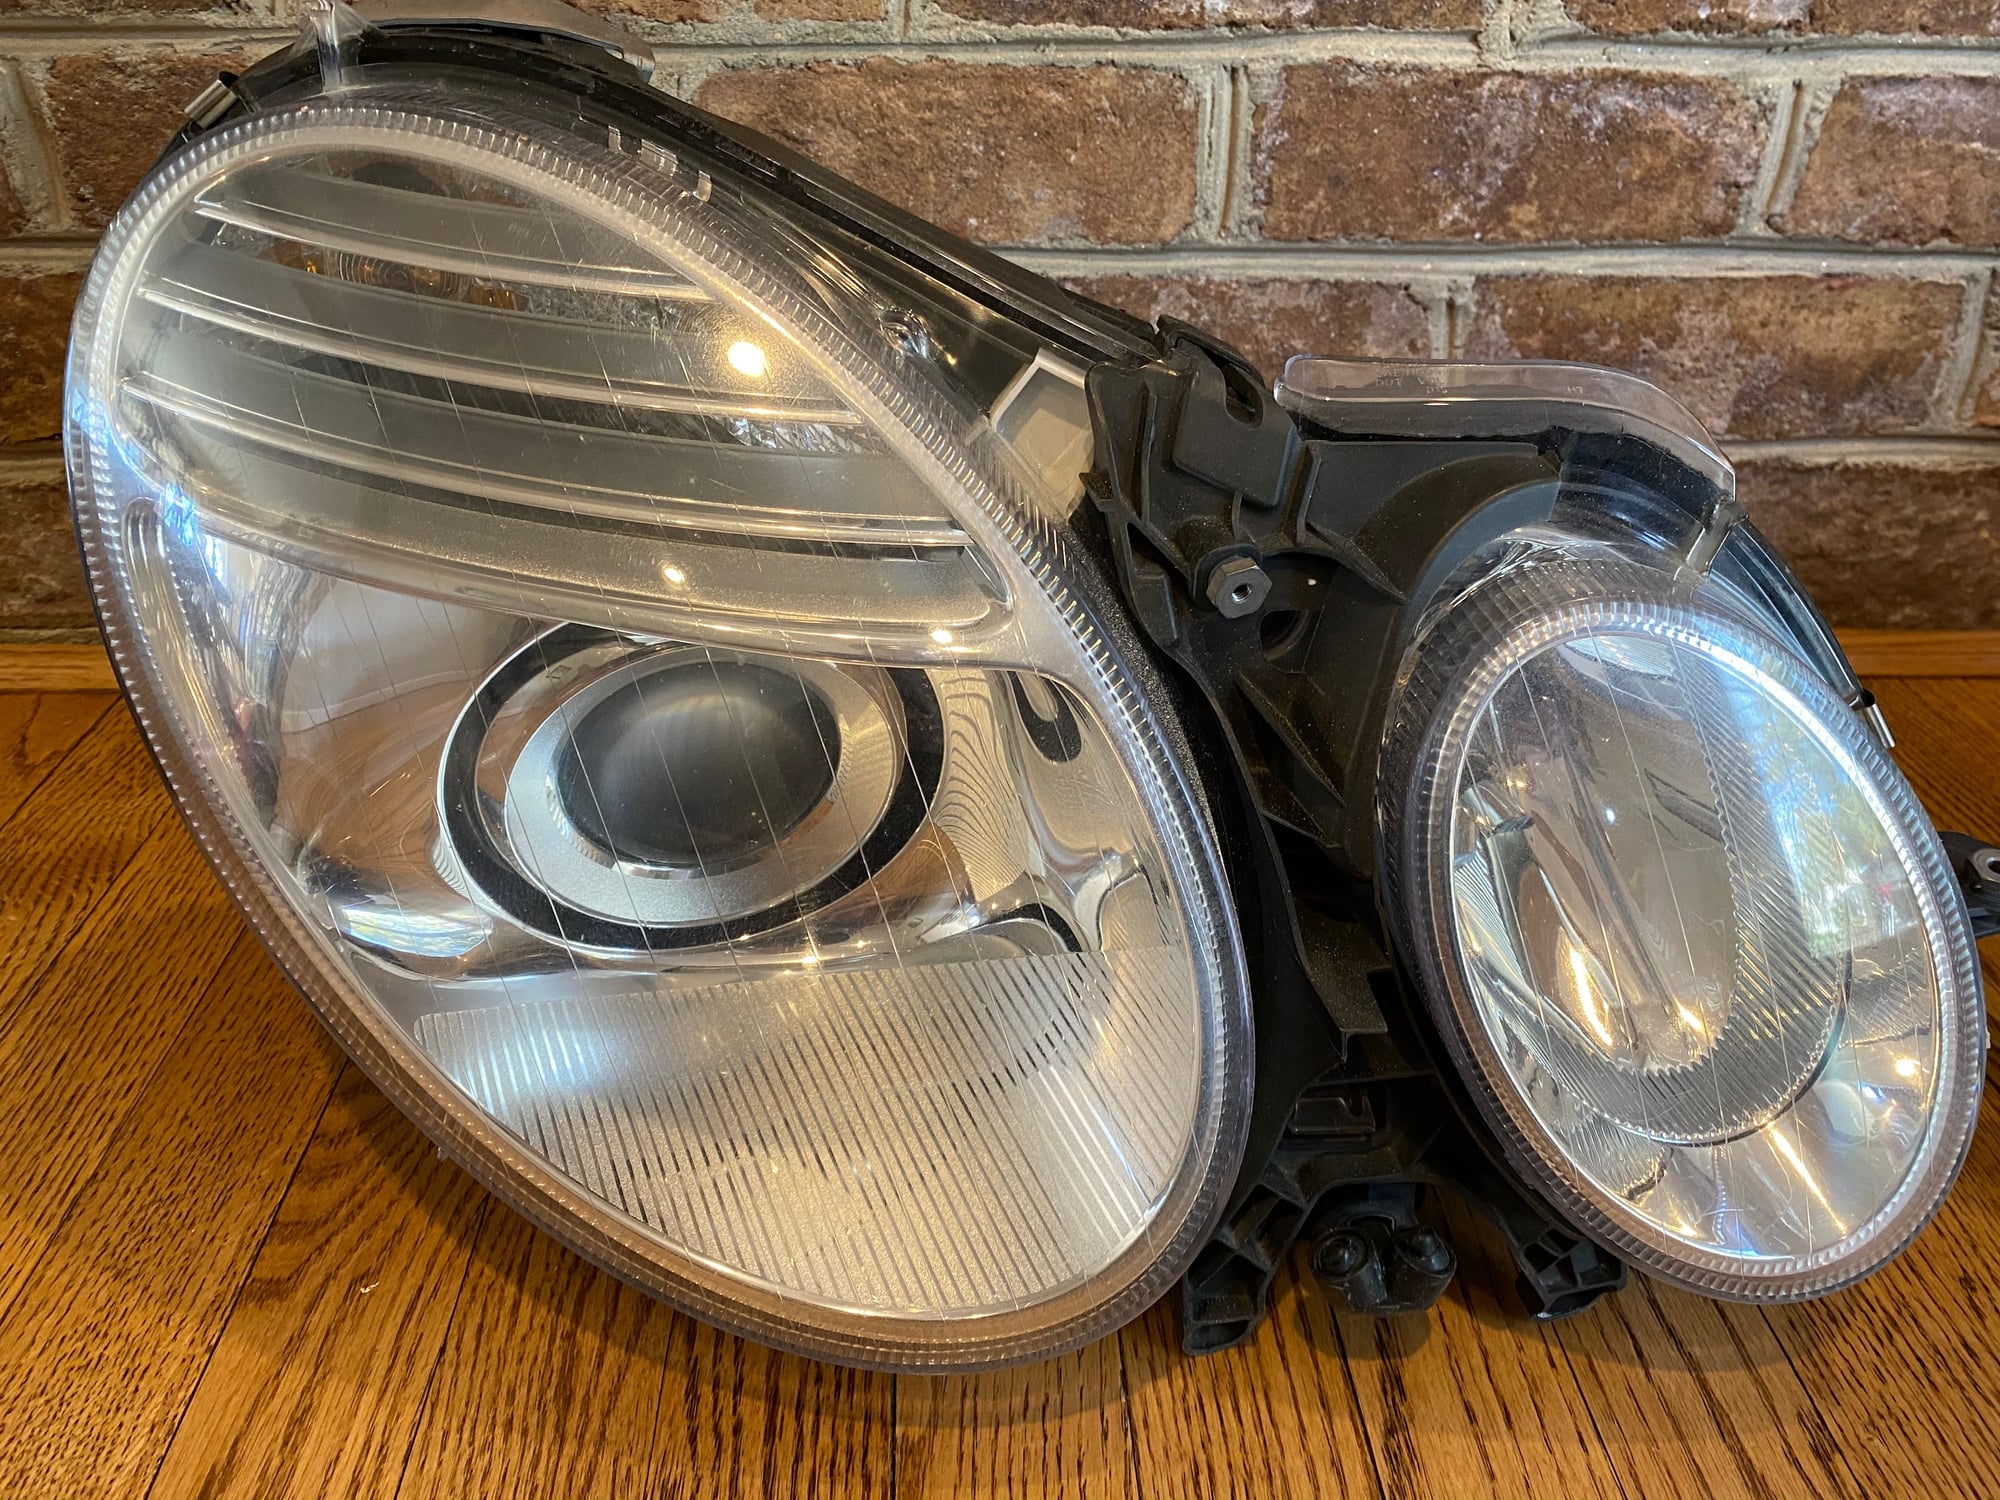 Lights - W211 Hella Bi-Xenon Projector Active Curve Headlights with Ballast Units and Washers - Used - 2004 to 2009 Mercedes-Benz E-Class - Great Falls, VA 22066, United States